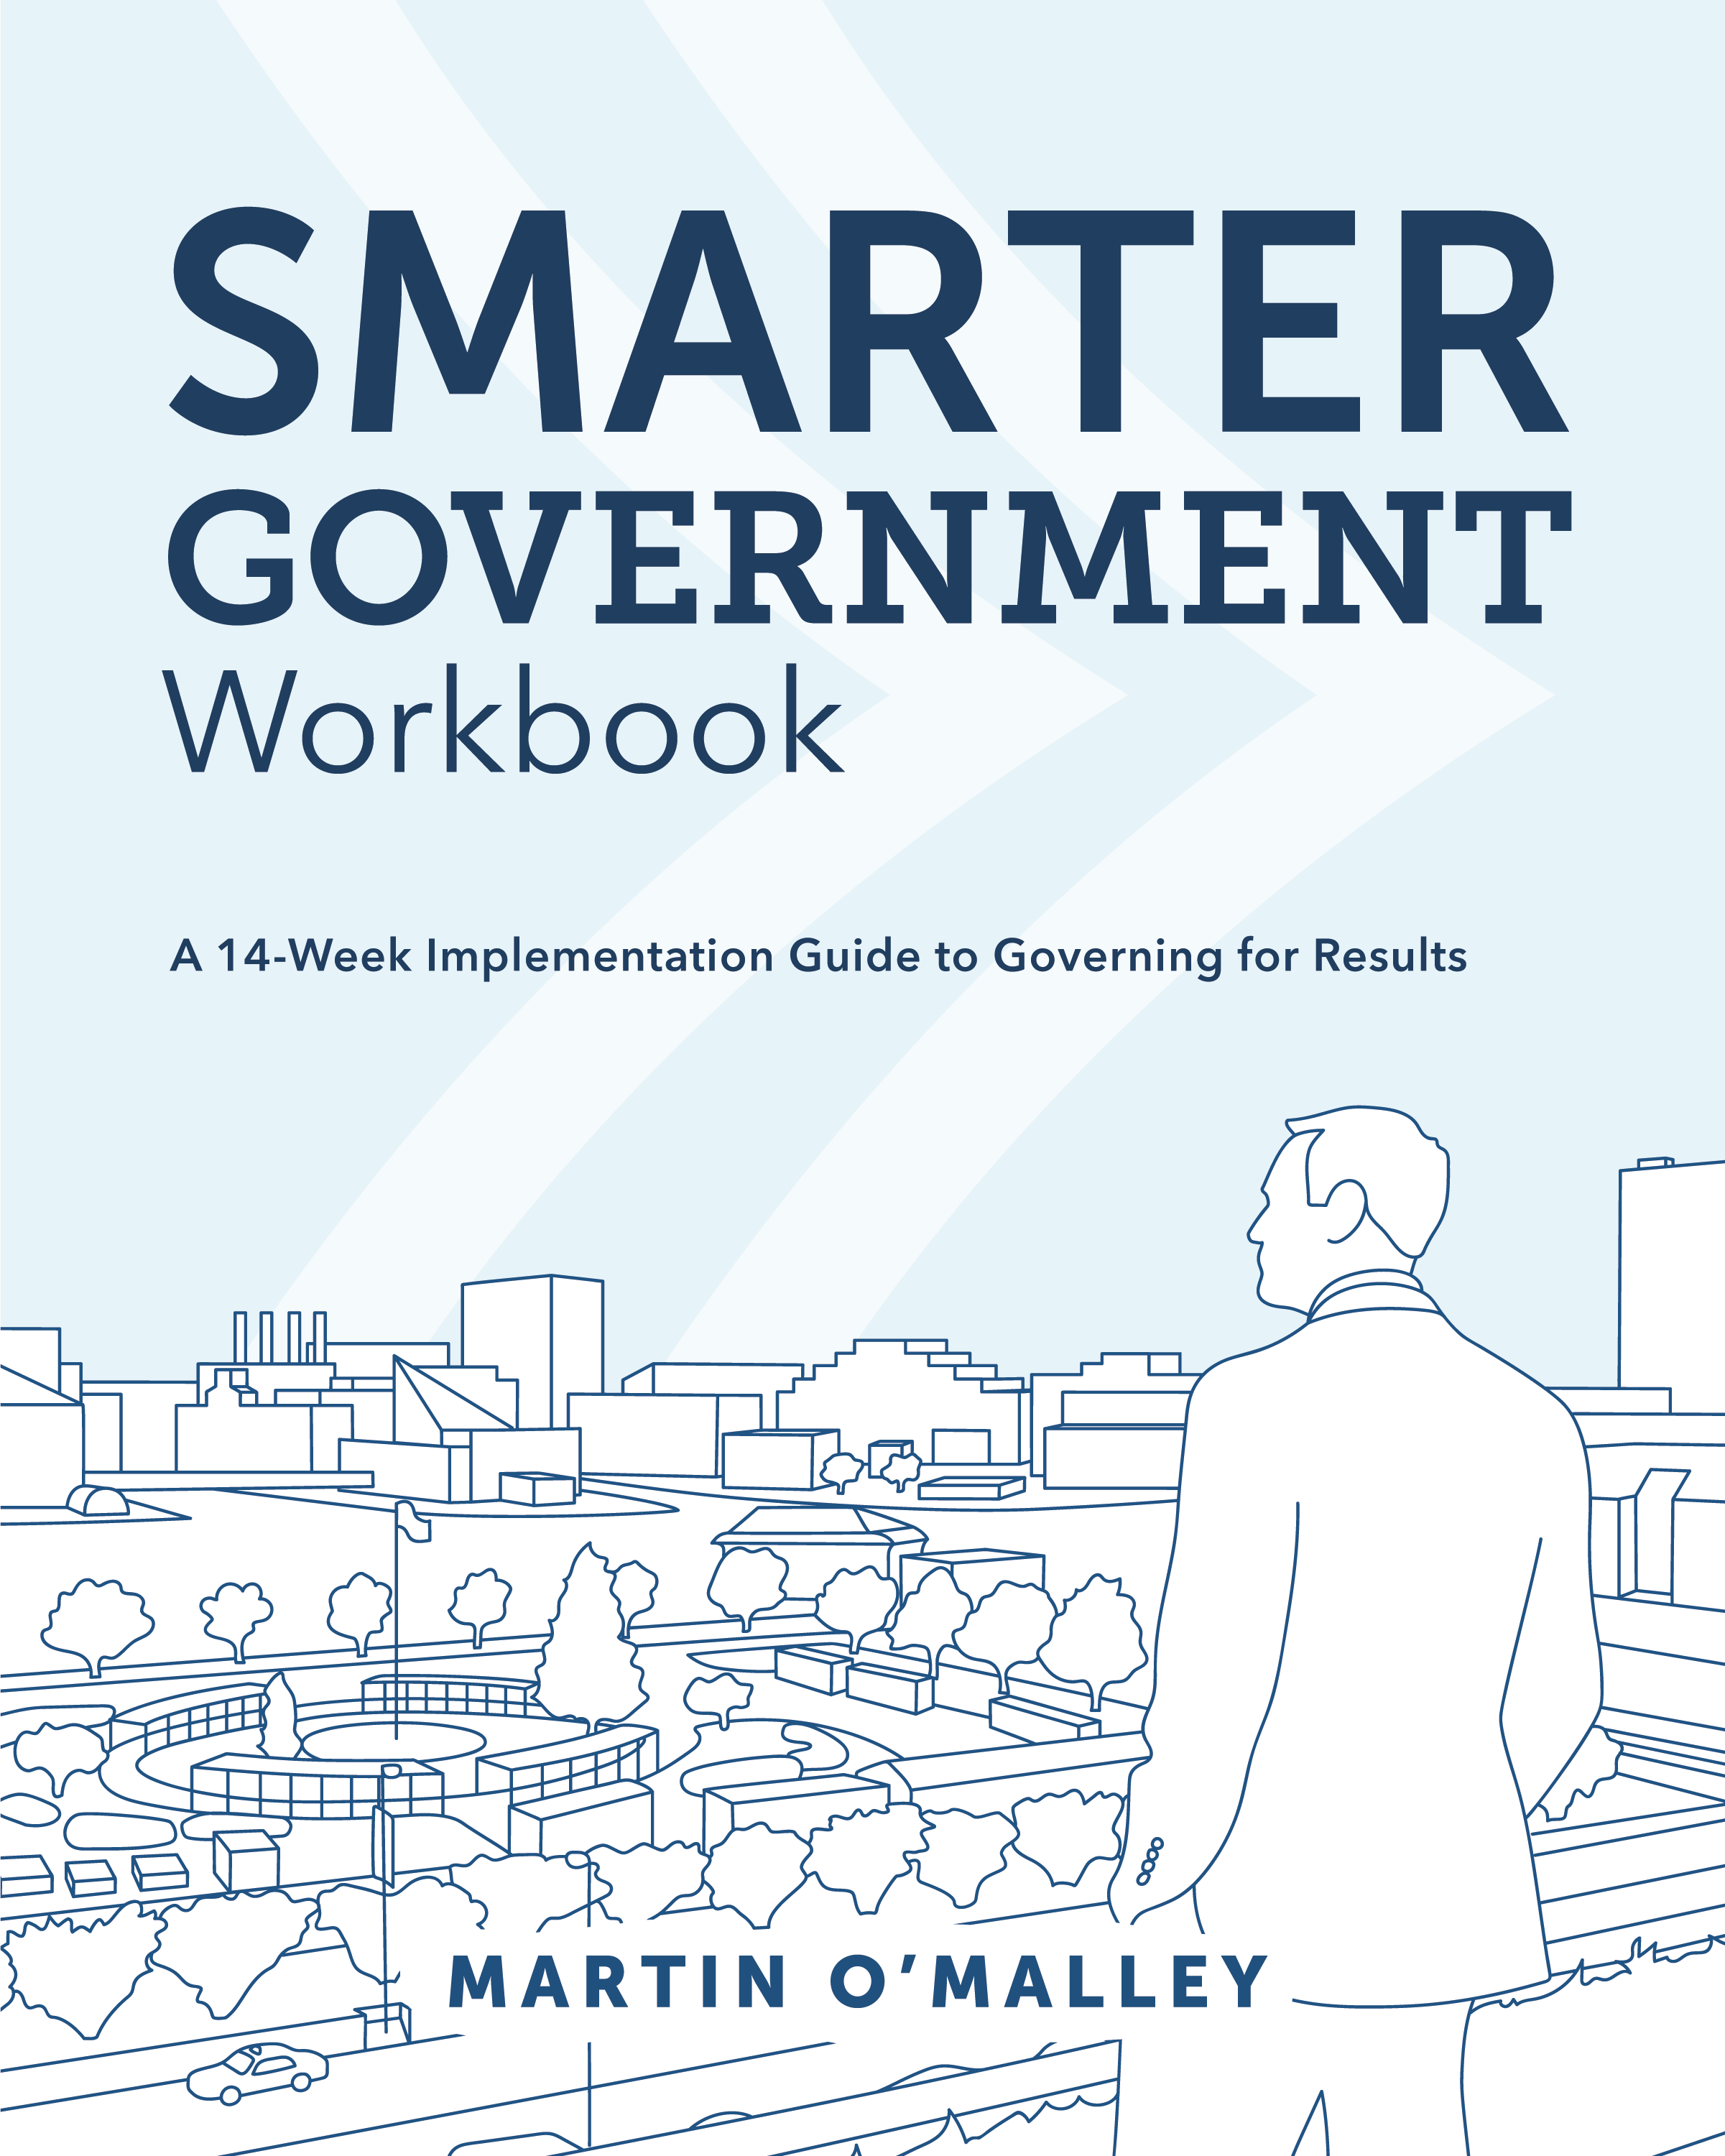 Smarter Government workbook cover